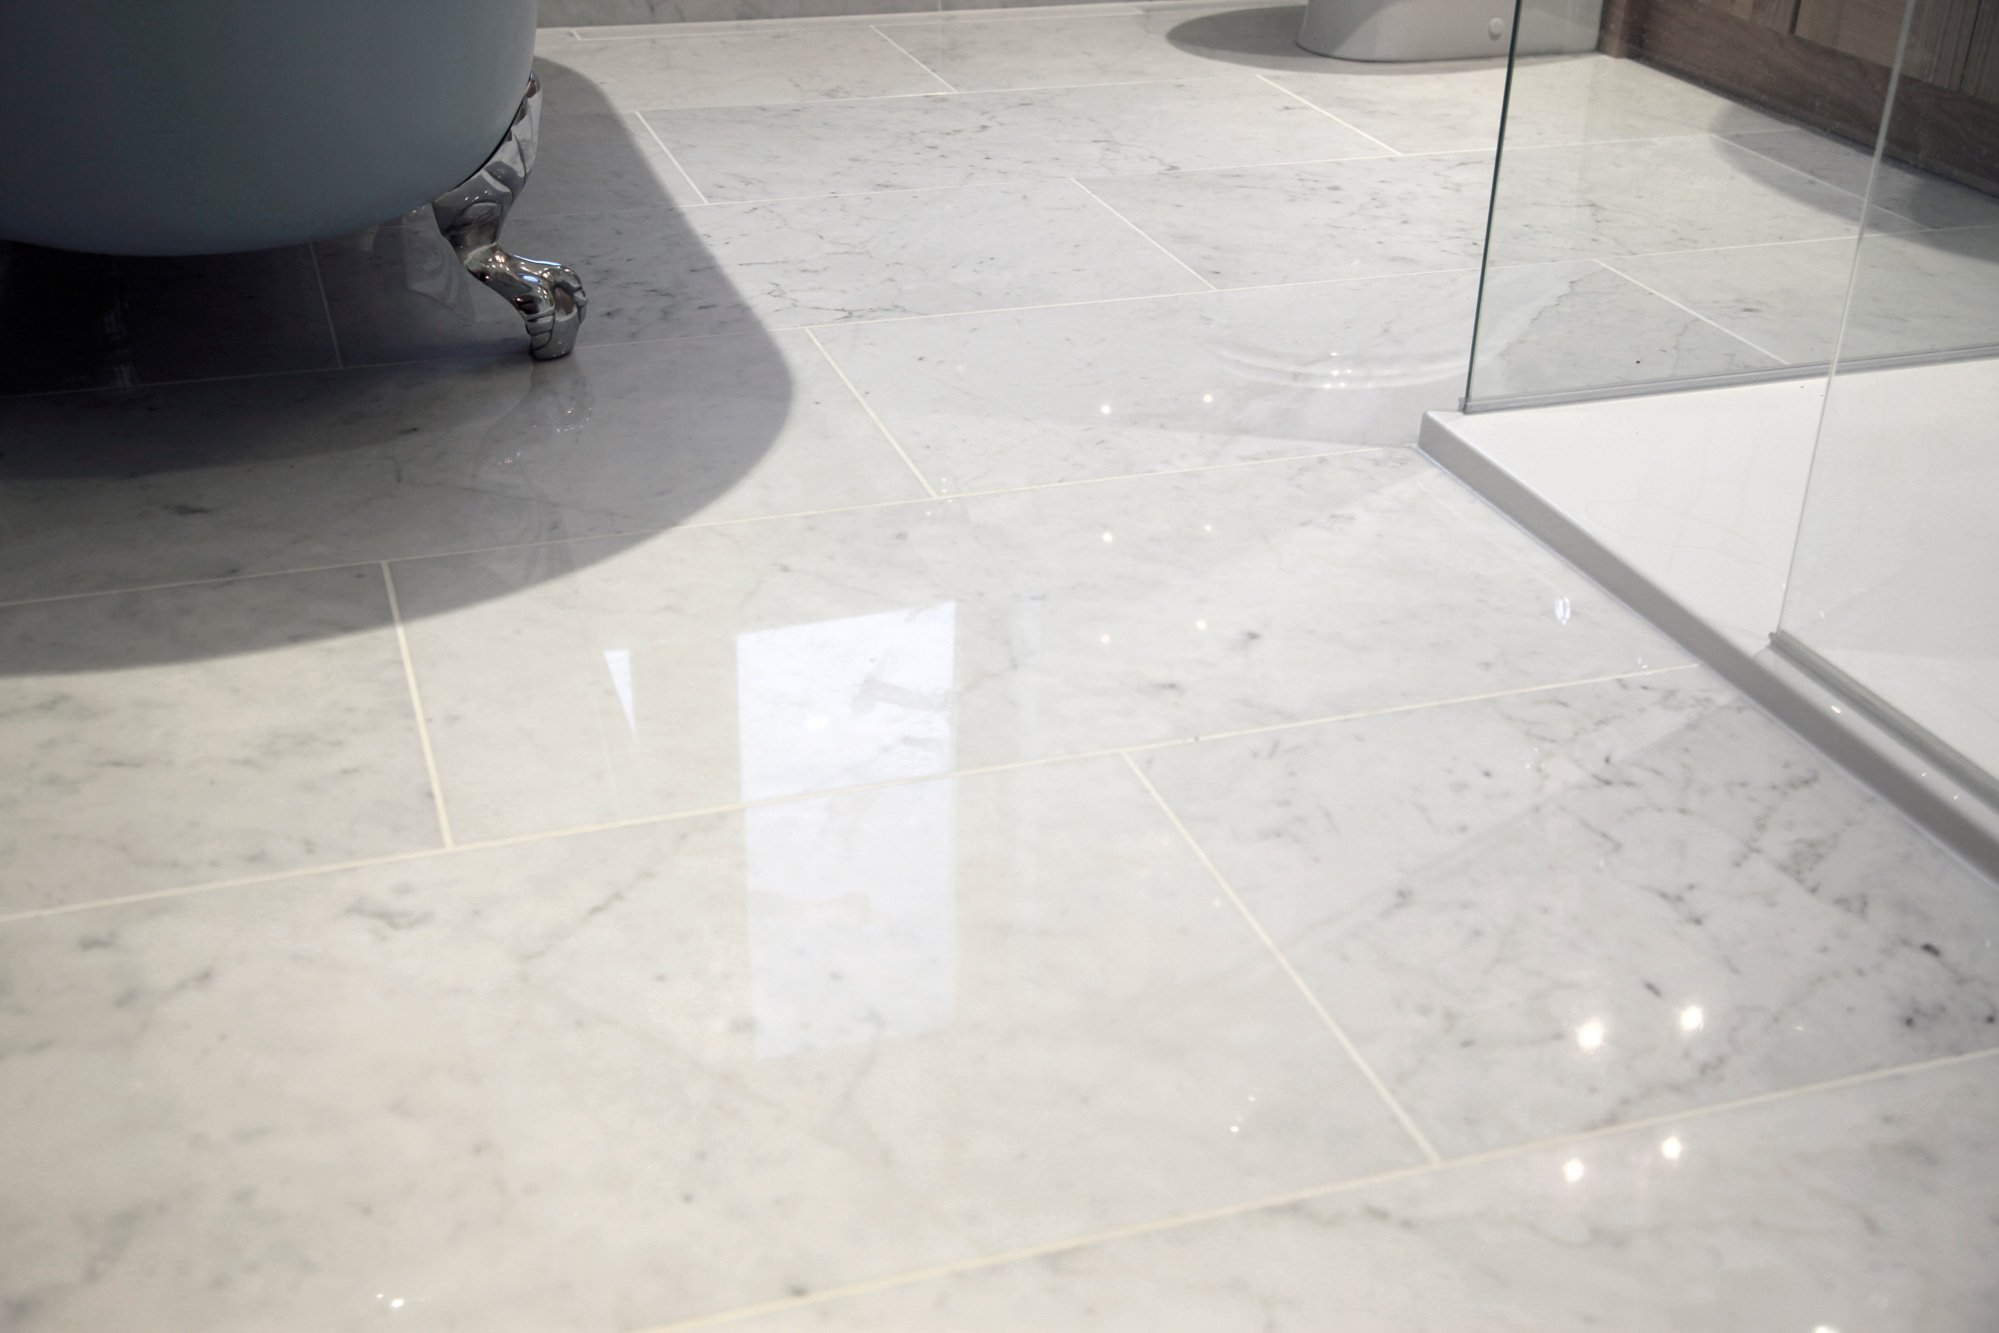 Carrara Tiles Italian White Carrara Marble Tiles And Glass intended for size 1999 X 1333